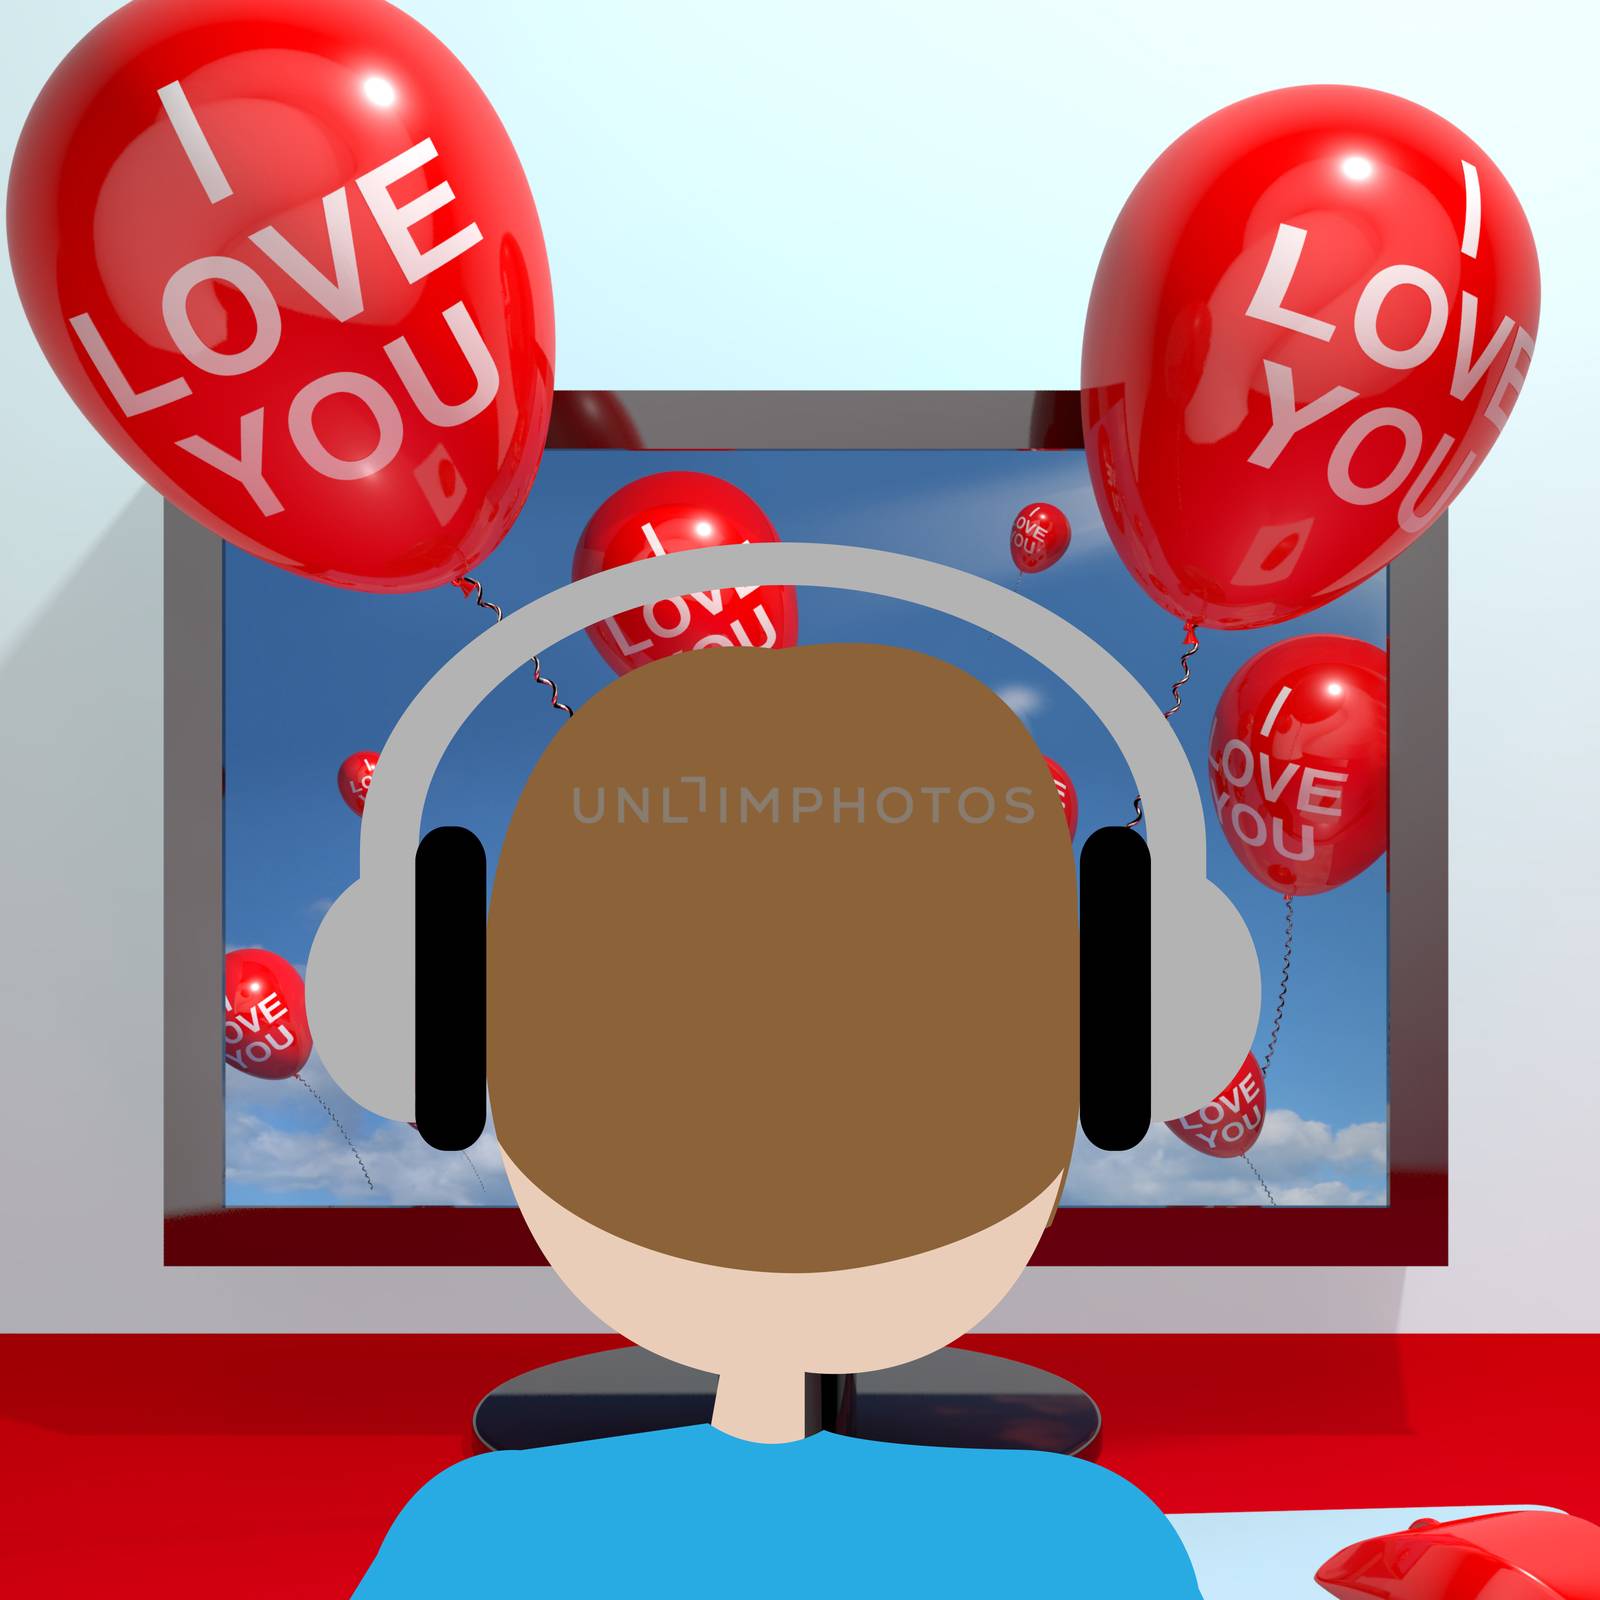 I Love You Balloons From Computer Screen Showing Love 3d Illustr by stuartmiles